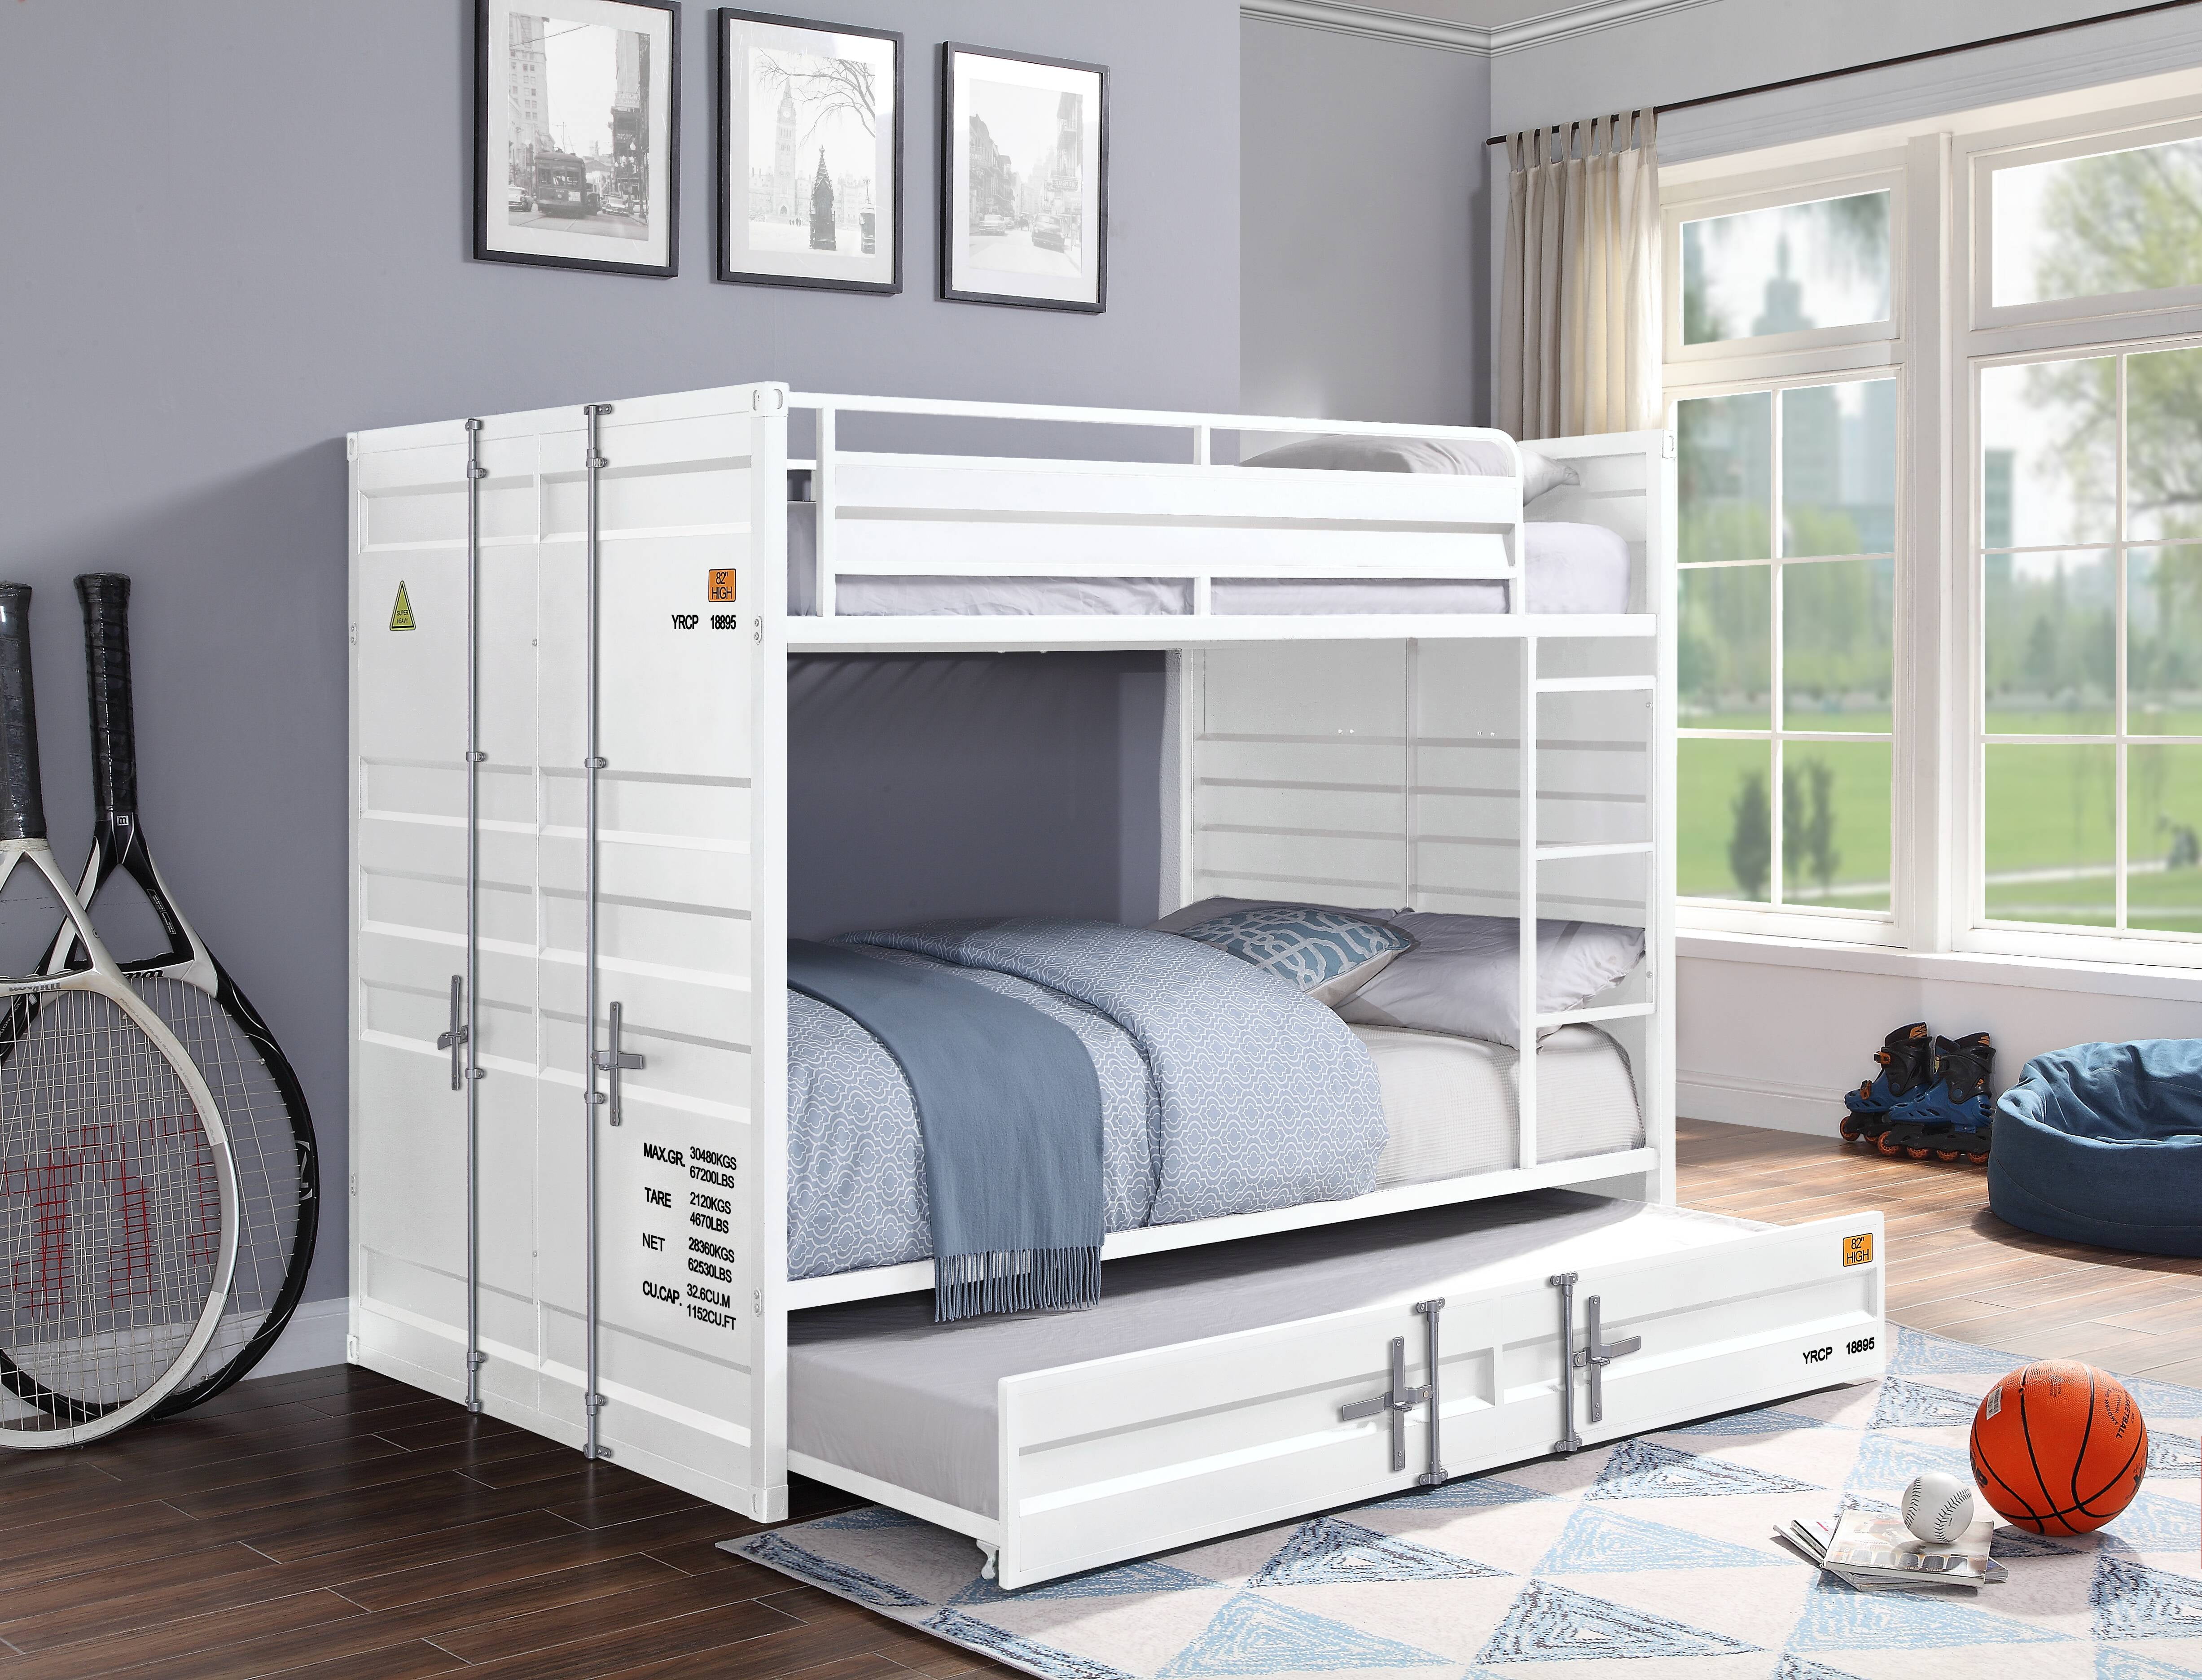 Picture of ACME Furniture 37885 78 x 56 x 65 in. Cargo Bunk Bed, White - Full Size